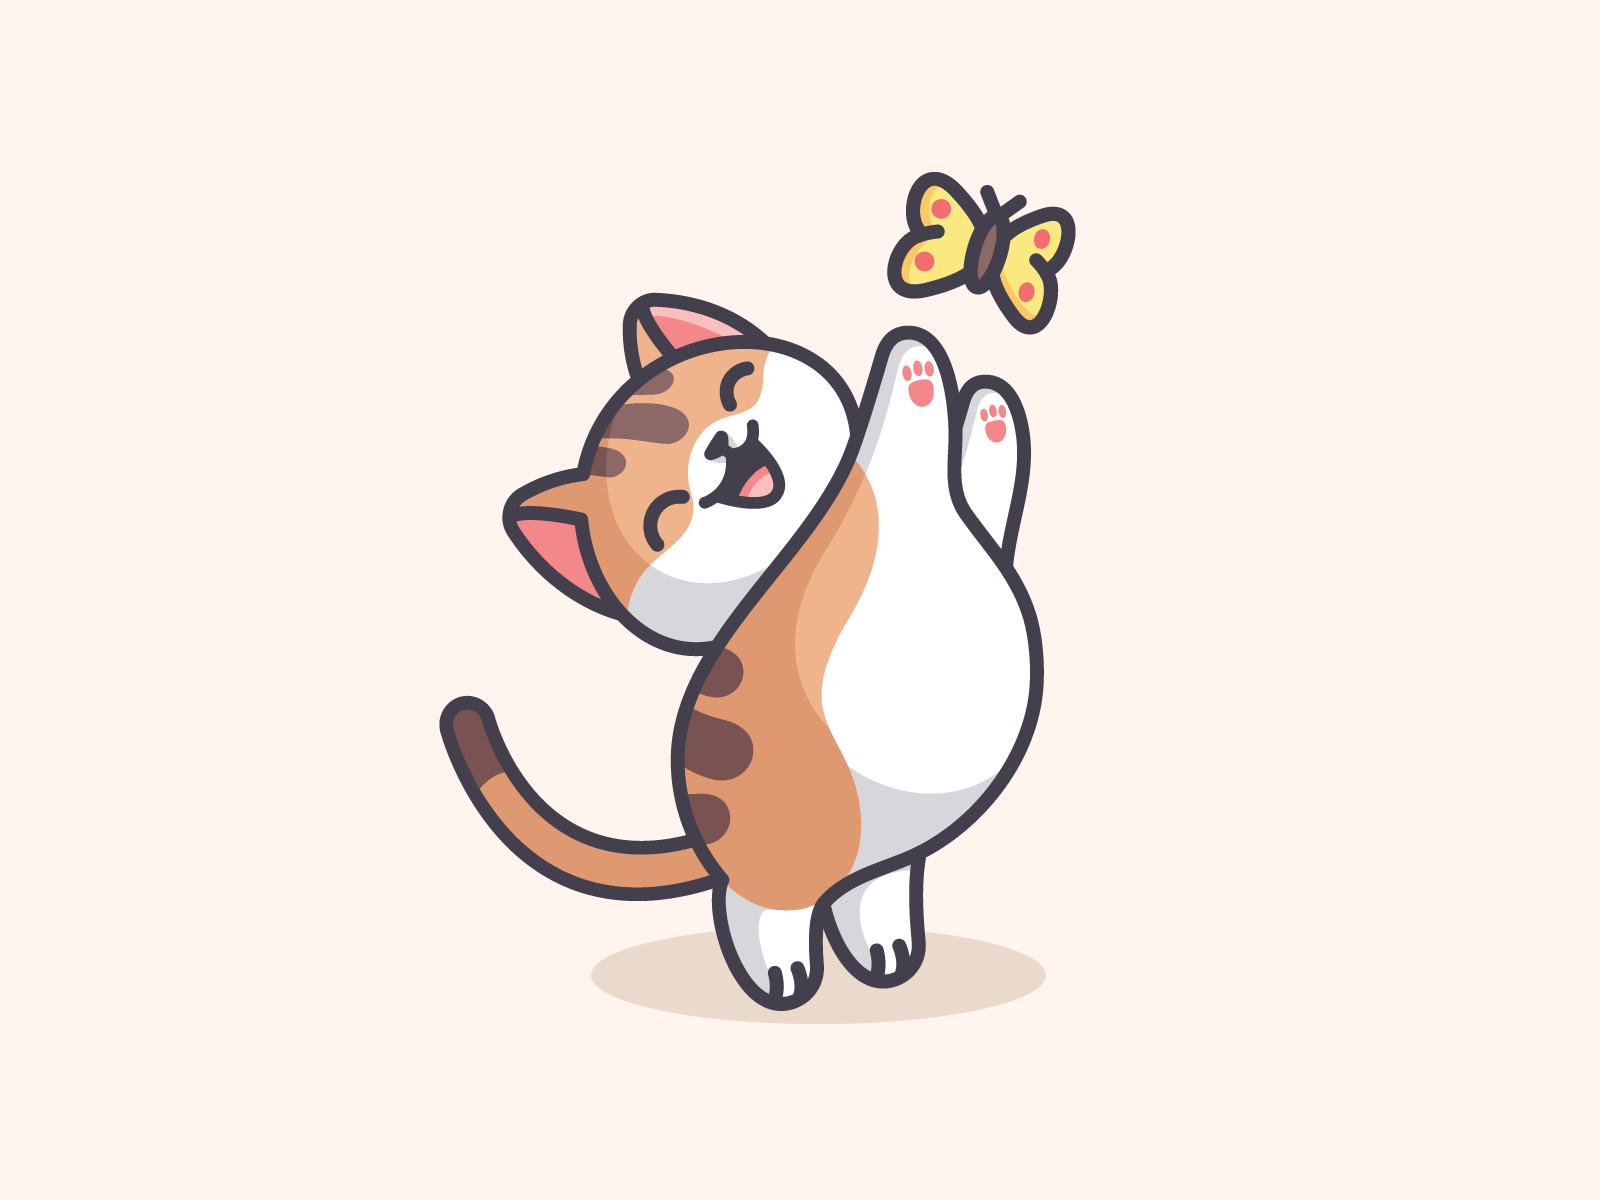 Cat Catching Butterfly adorable butterfly cat catching character cute fat funny happy holiday illustration joyful kitten kitty lovely mascot pet playful positive weekend